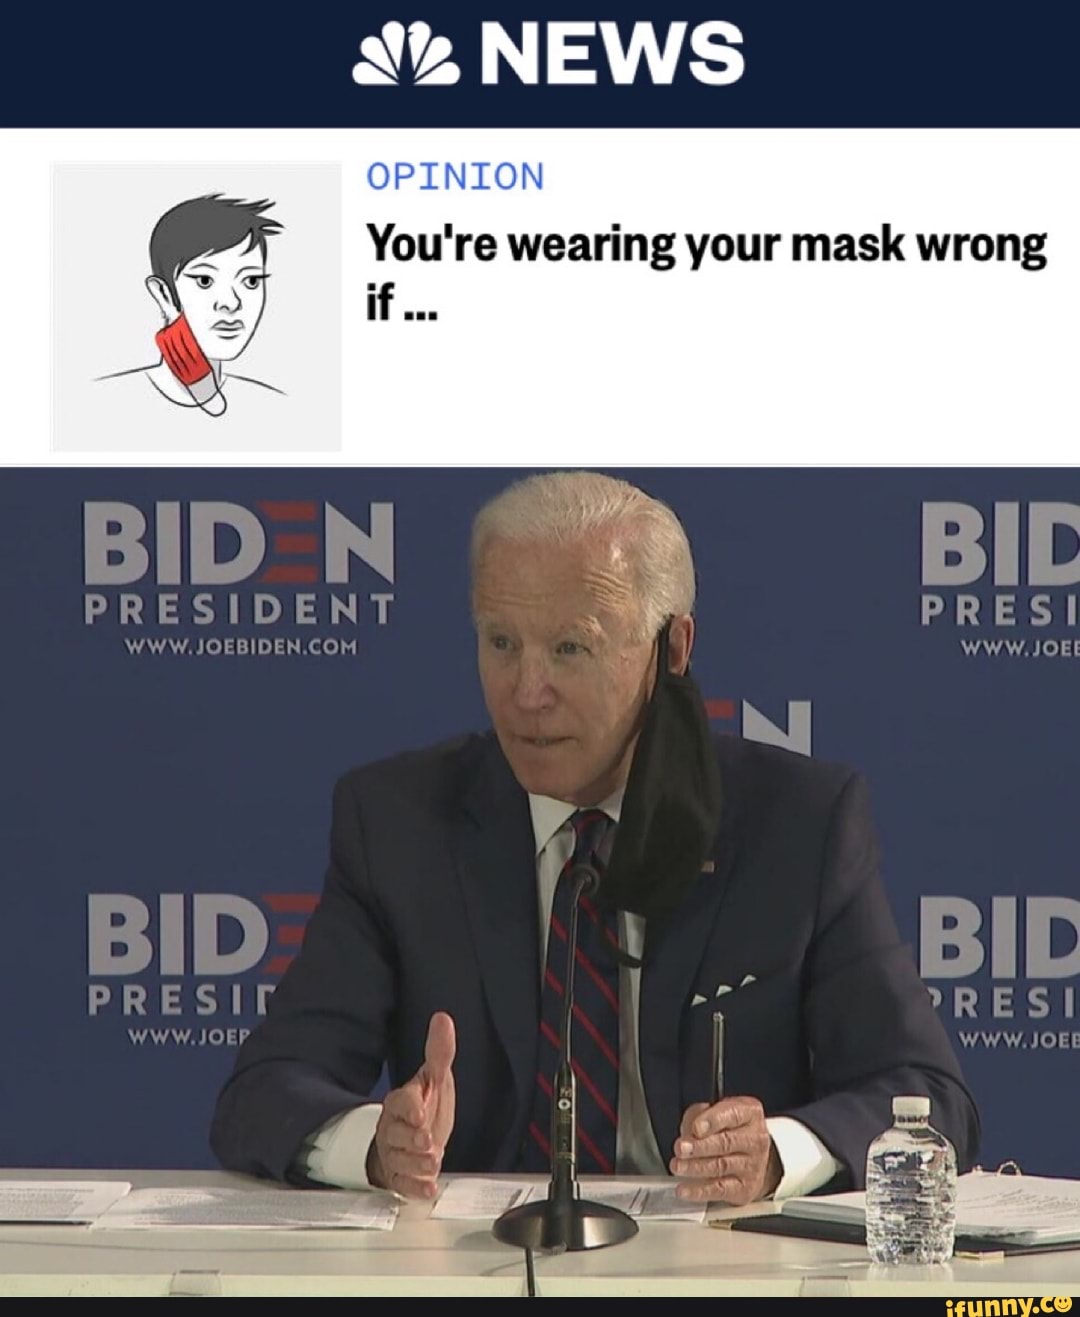 OPINION You're wearing your mask wrong - seo.title